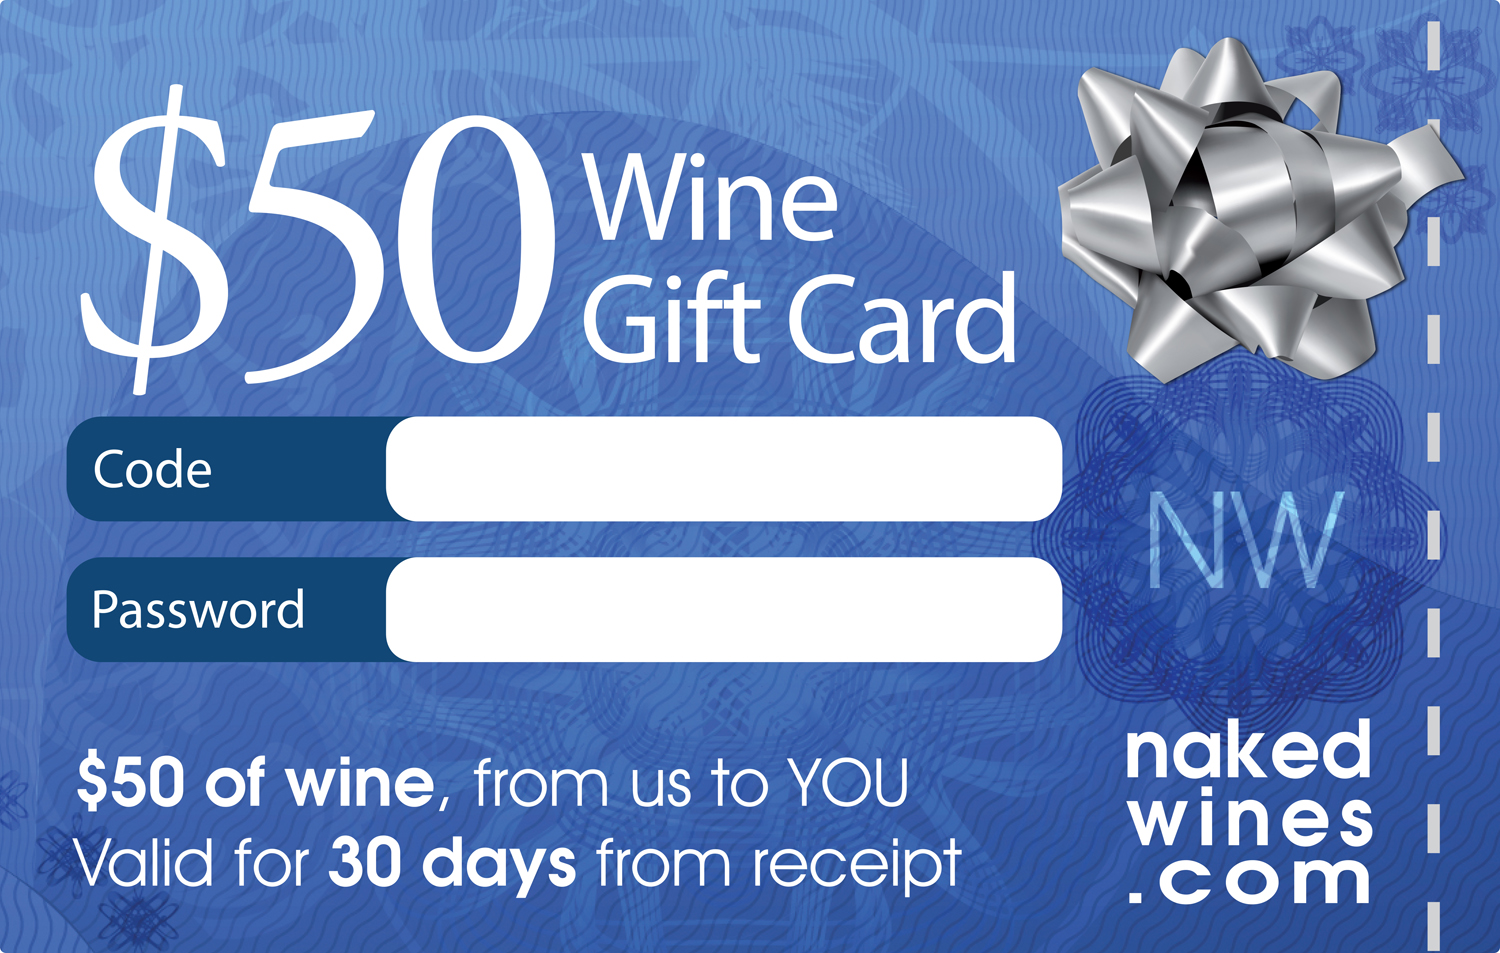 overstockArt.com has partnered with NakedWines.com to give away a free $50 Wine Gift Voucher for all purchases this Holiday Season.